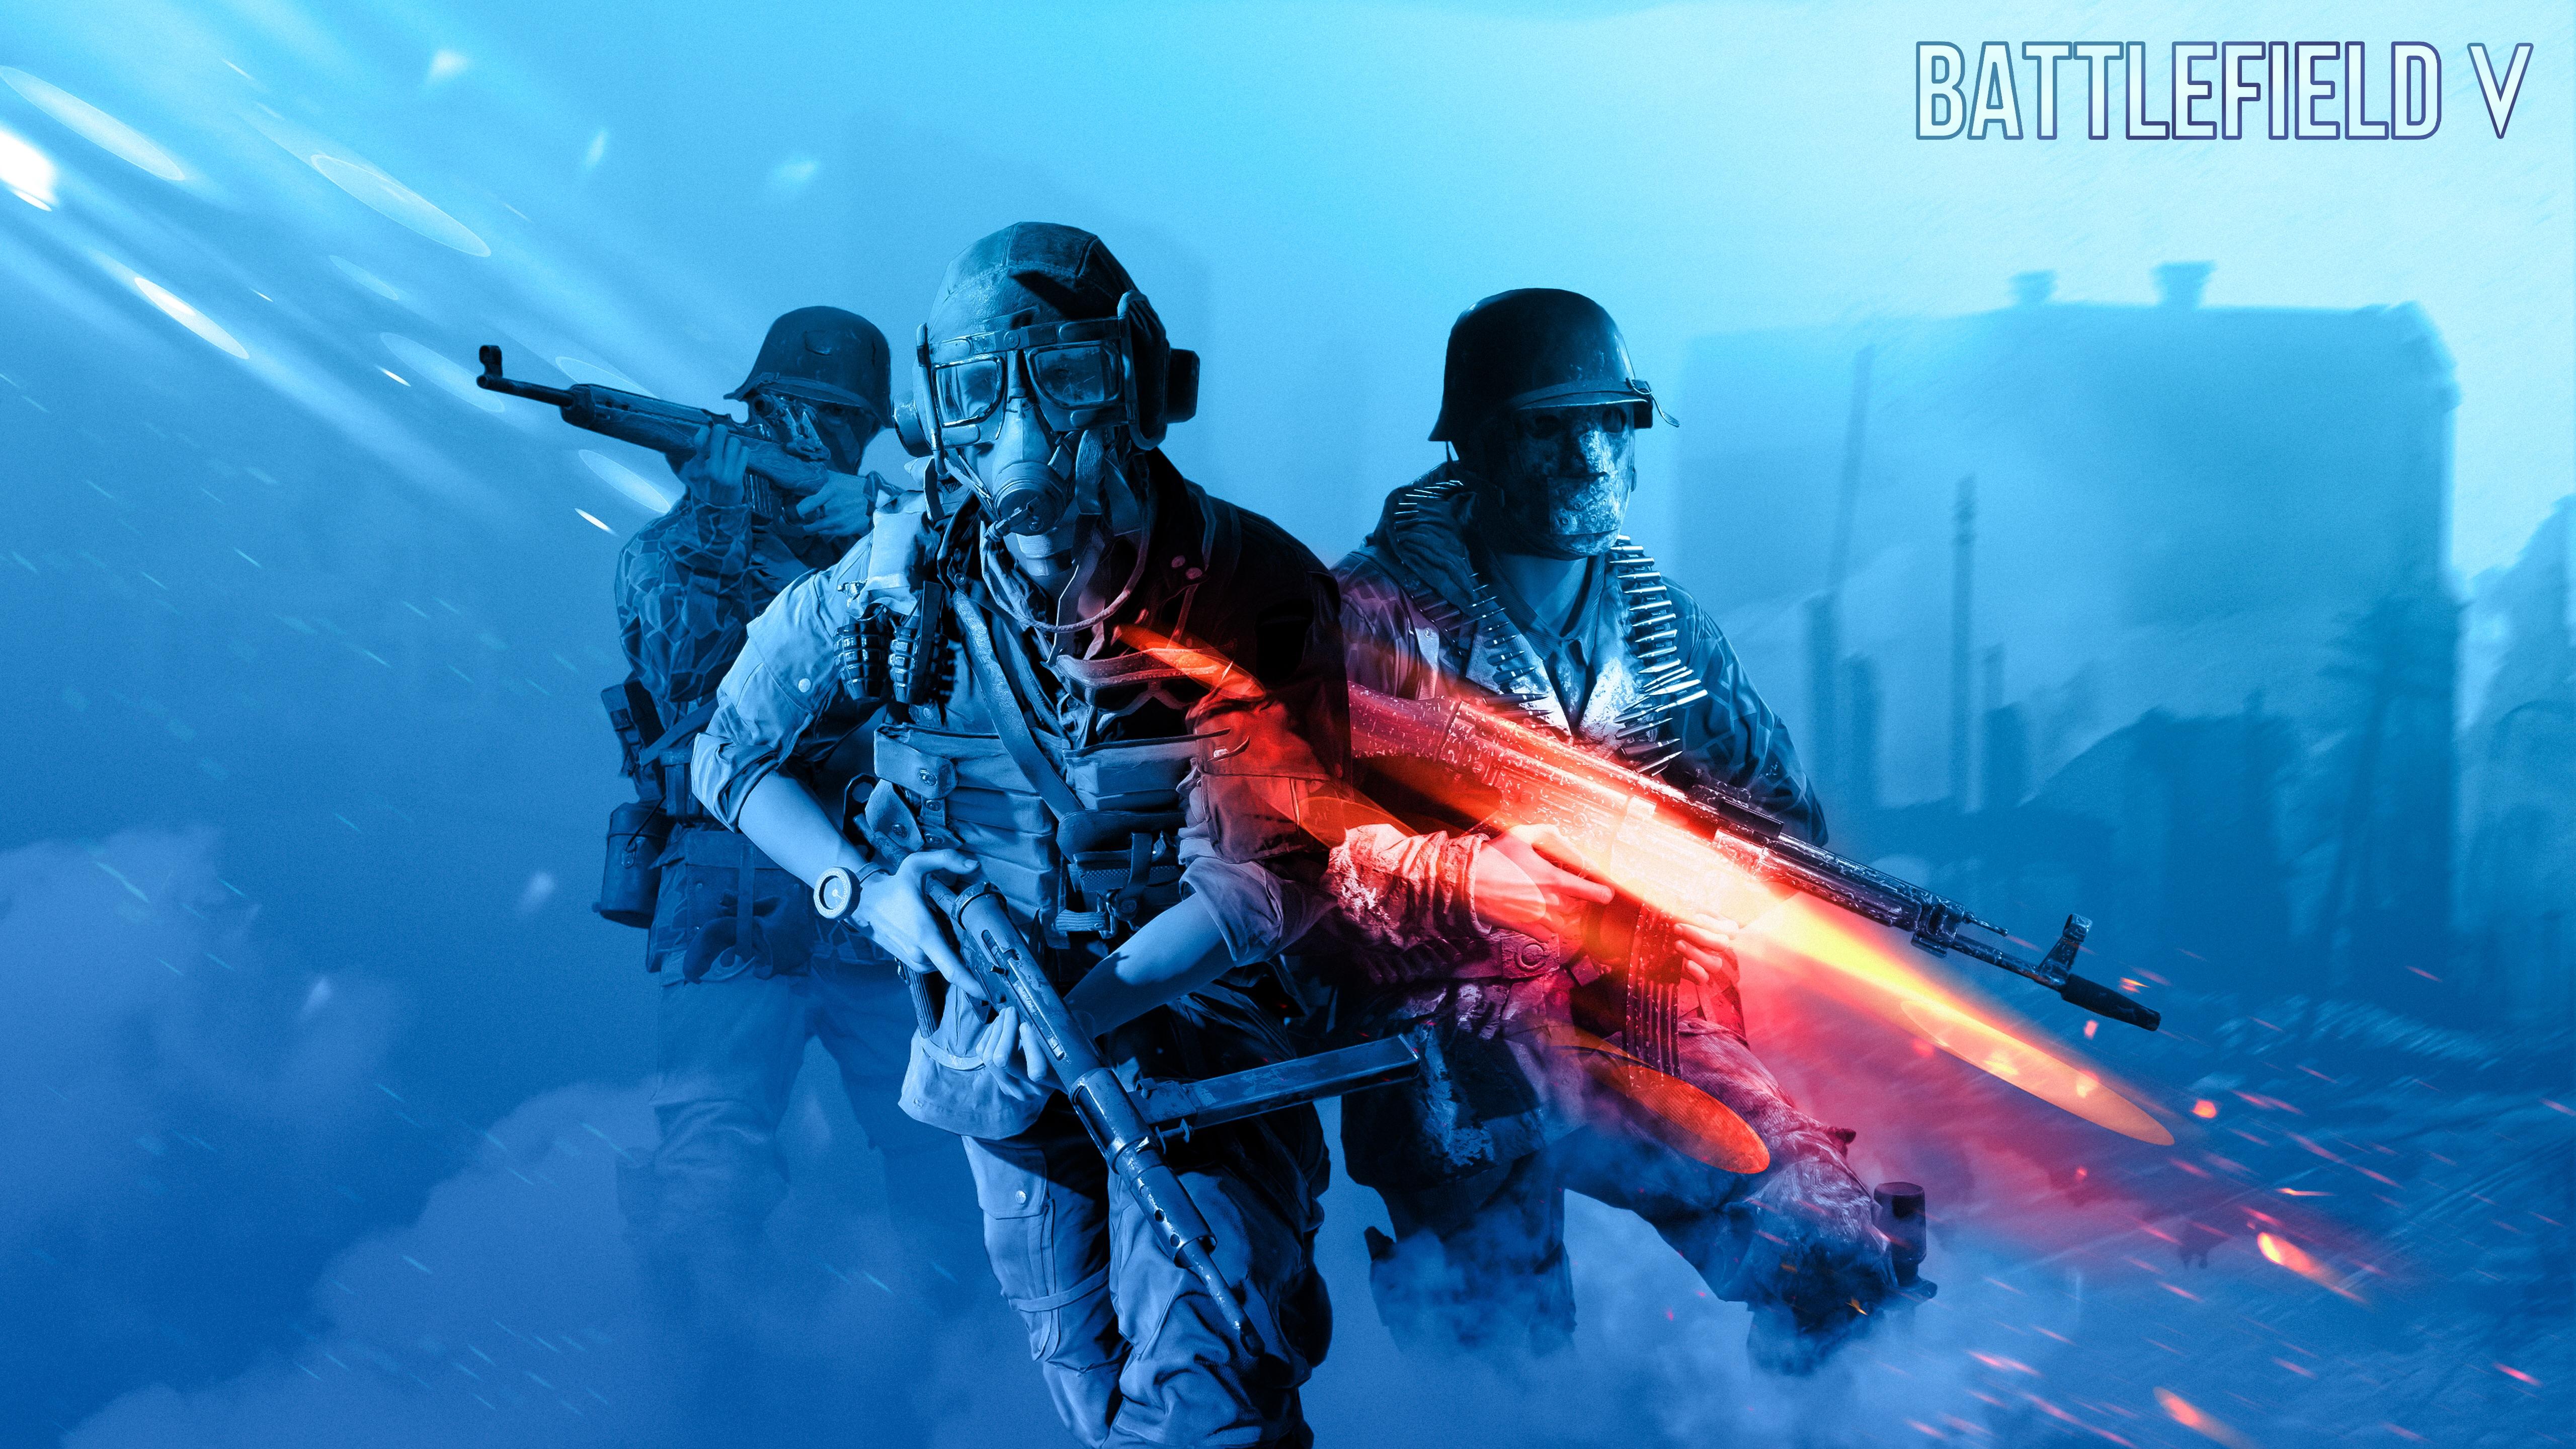 OC can't stop myself from creating new wallpaper for BFV